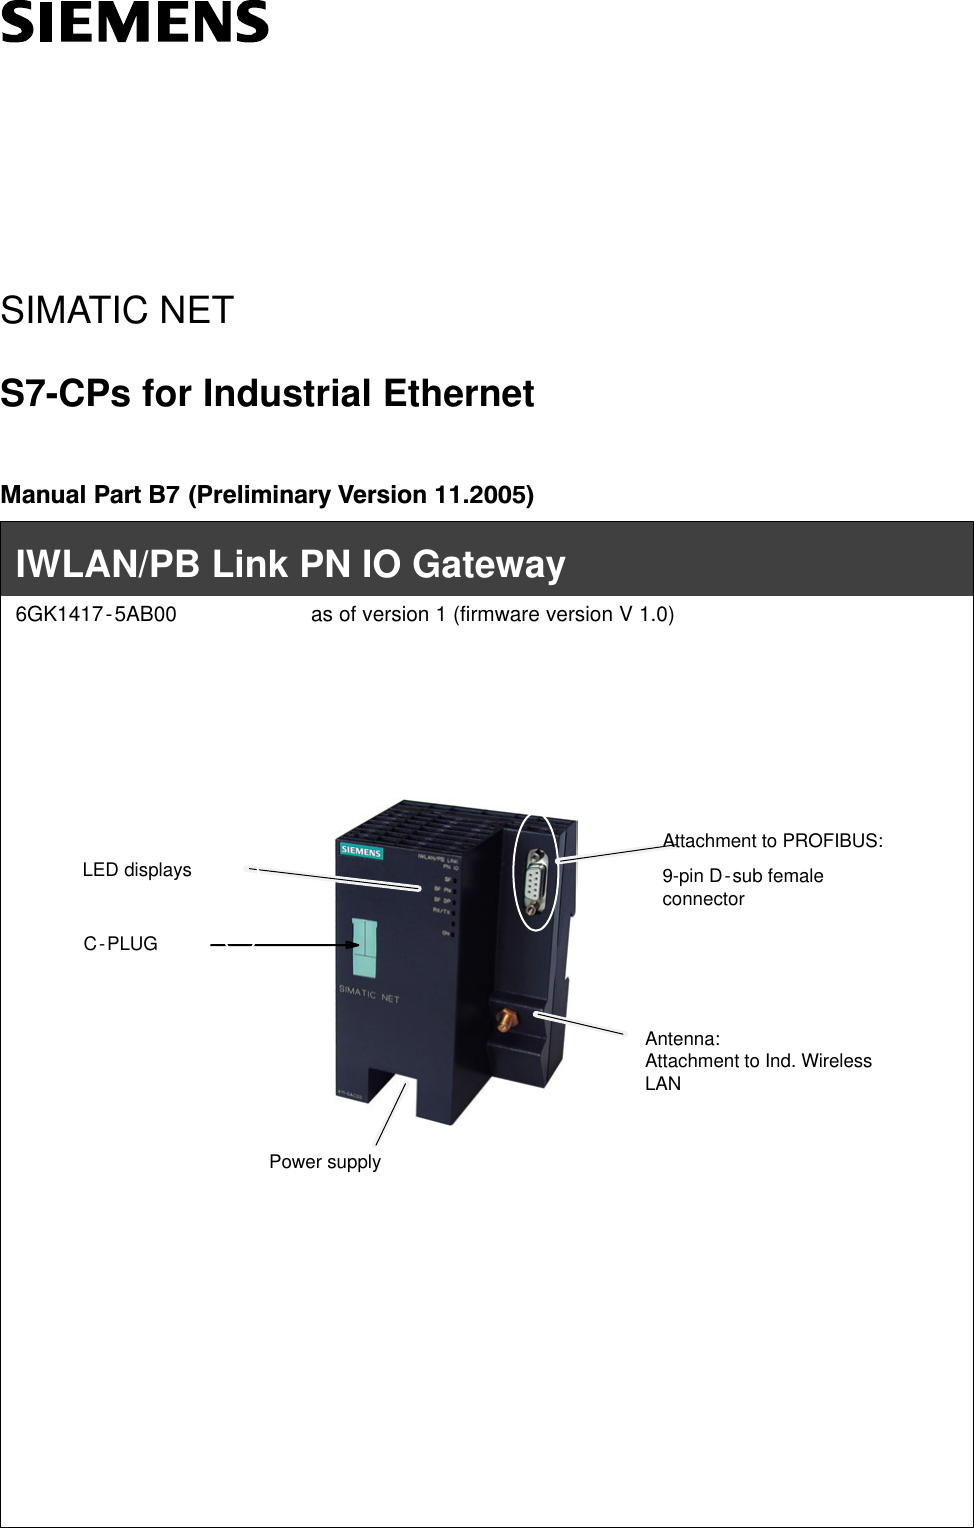 SIMATIC NETS7-CPs for Industrial EthernetManual Part B7 (Preliminary Version 11.2005)LED displaysIWLAN/PB Link PN IO Gateway6GK1417-5AB00 as of version 1 (firmware version V 1.0)Antenna:Attachment to Ind. WirelessLANAttachment to PROFIBUS:9-pin D-sub femaleconnectorC-PLUGPower supply